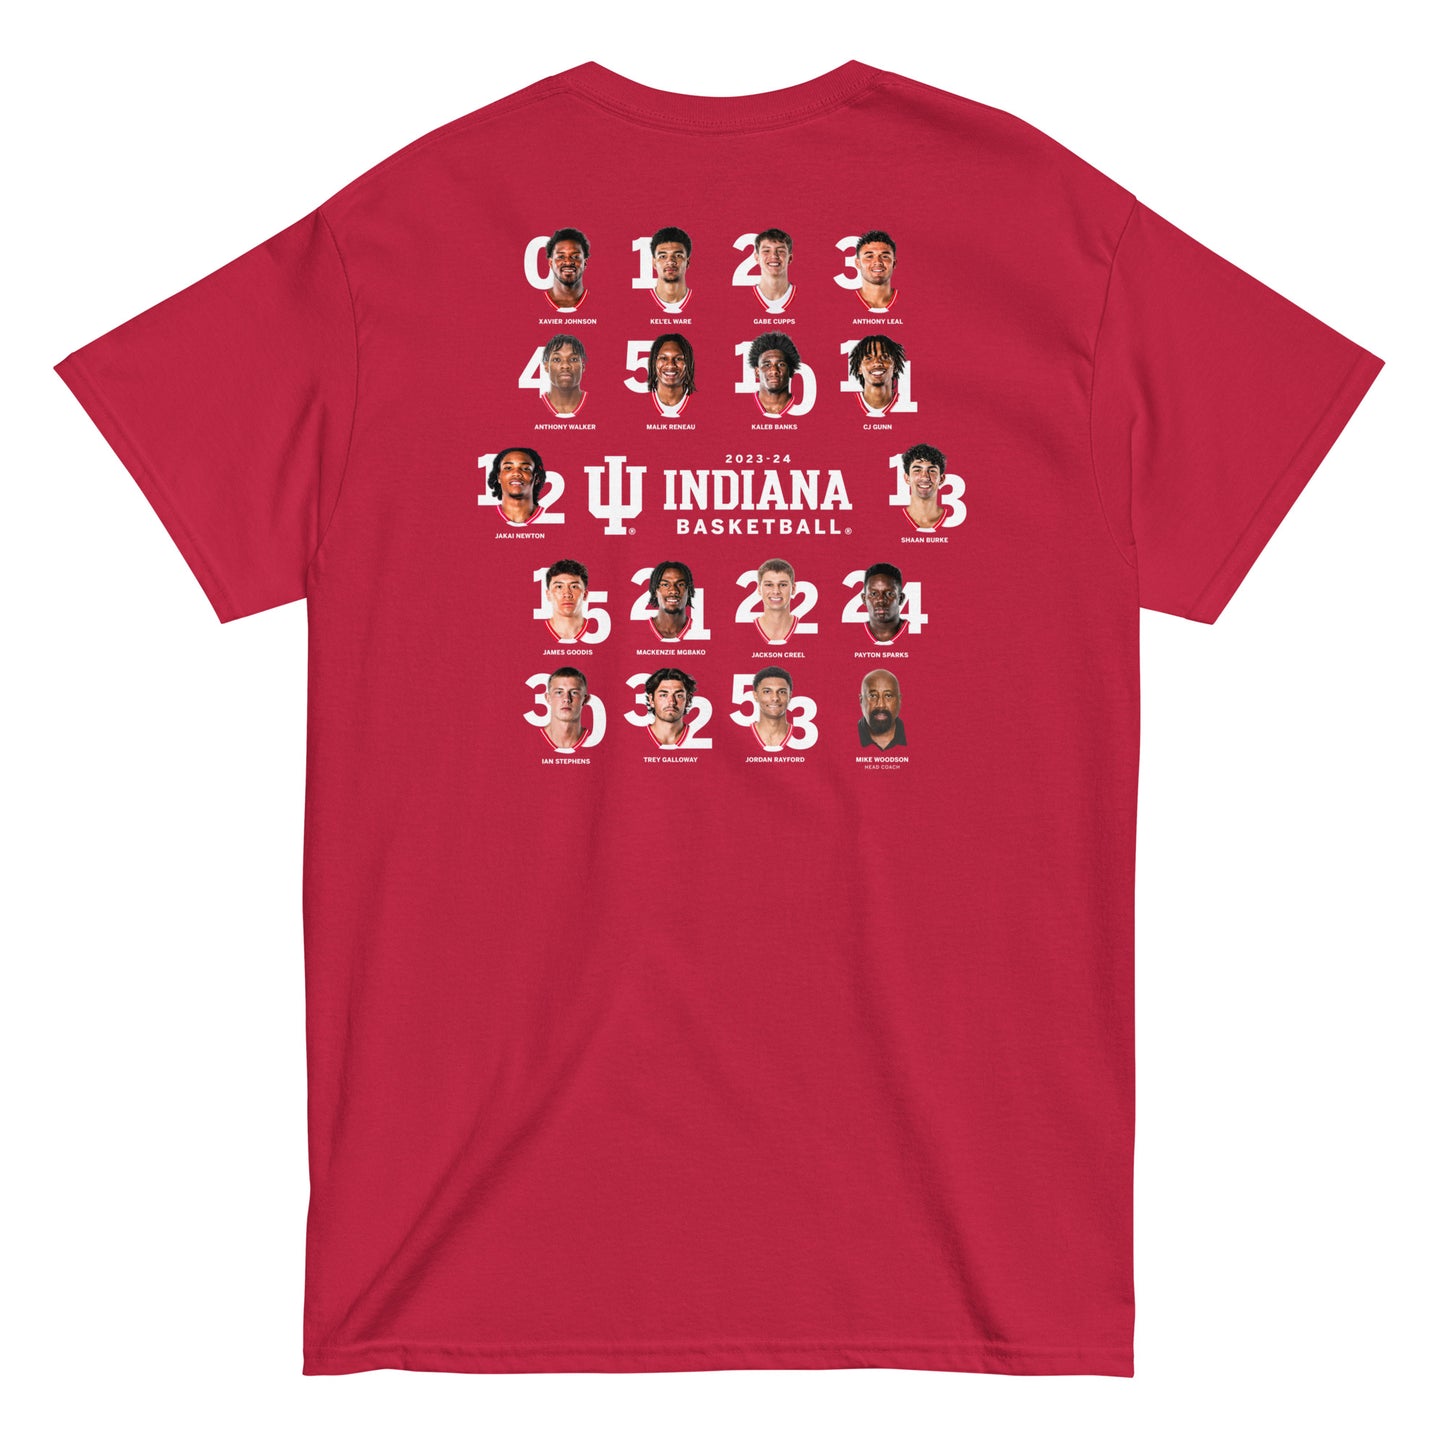 LIMITED RELEASE: 23-24 Men's Basketball Floating Heads Tee